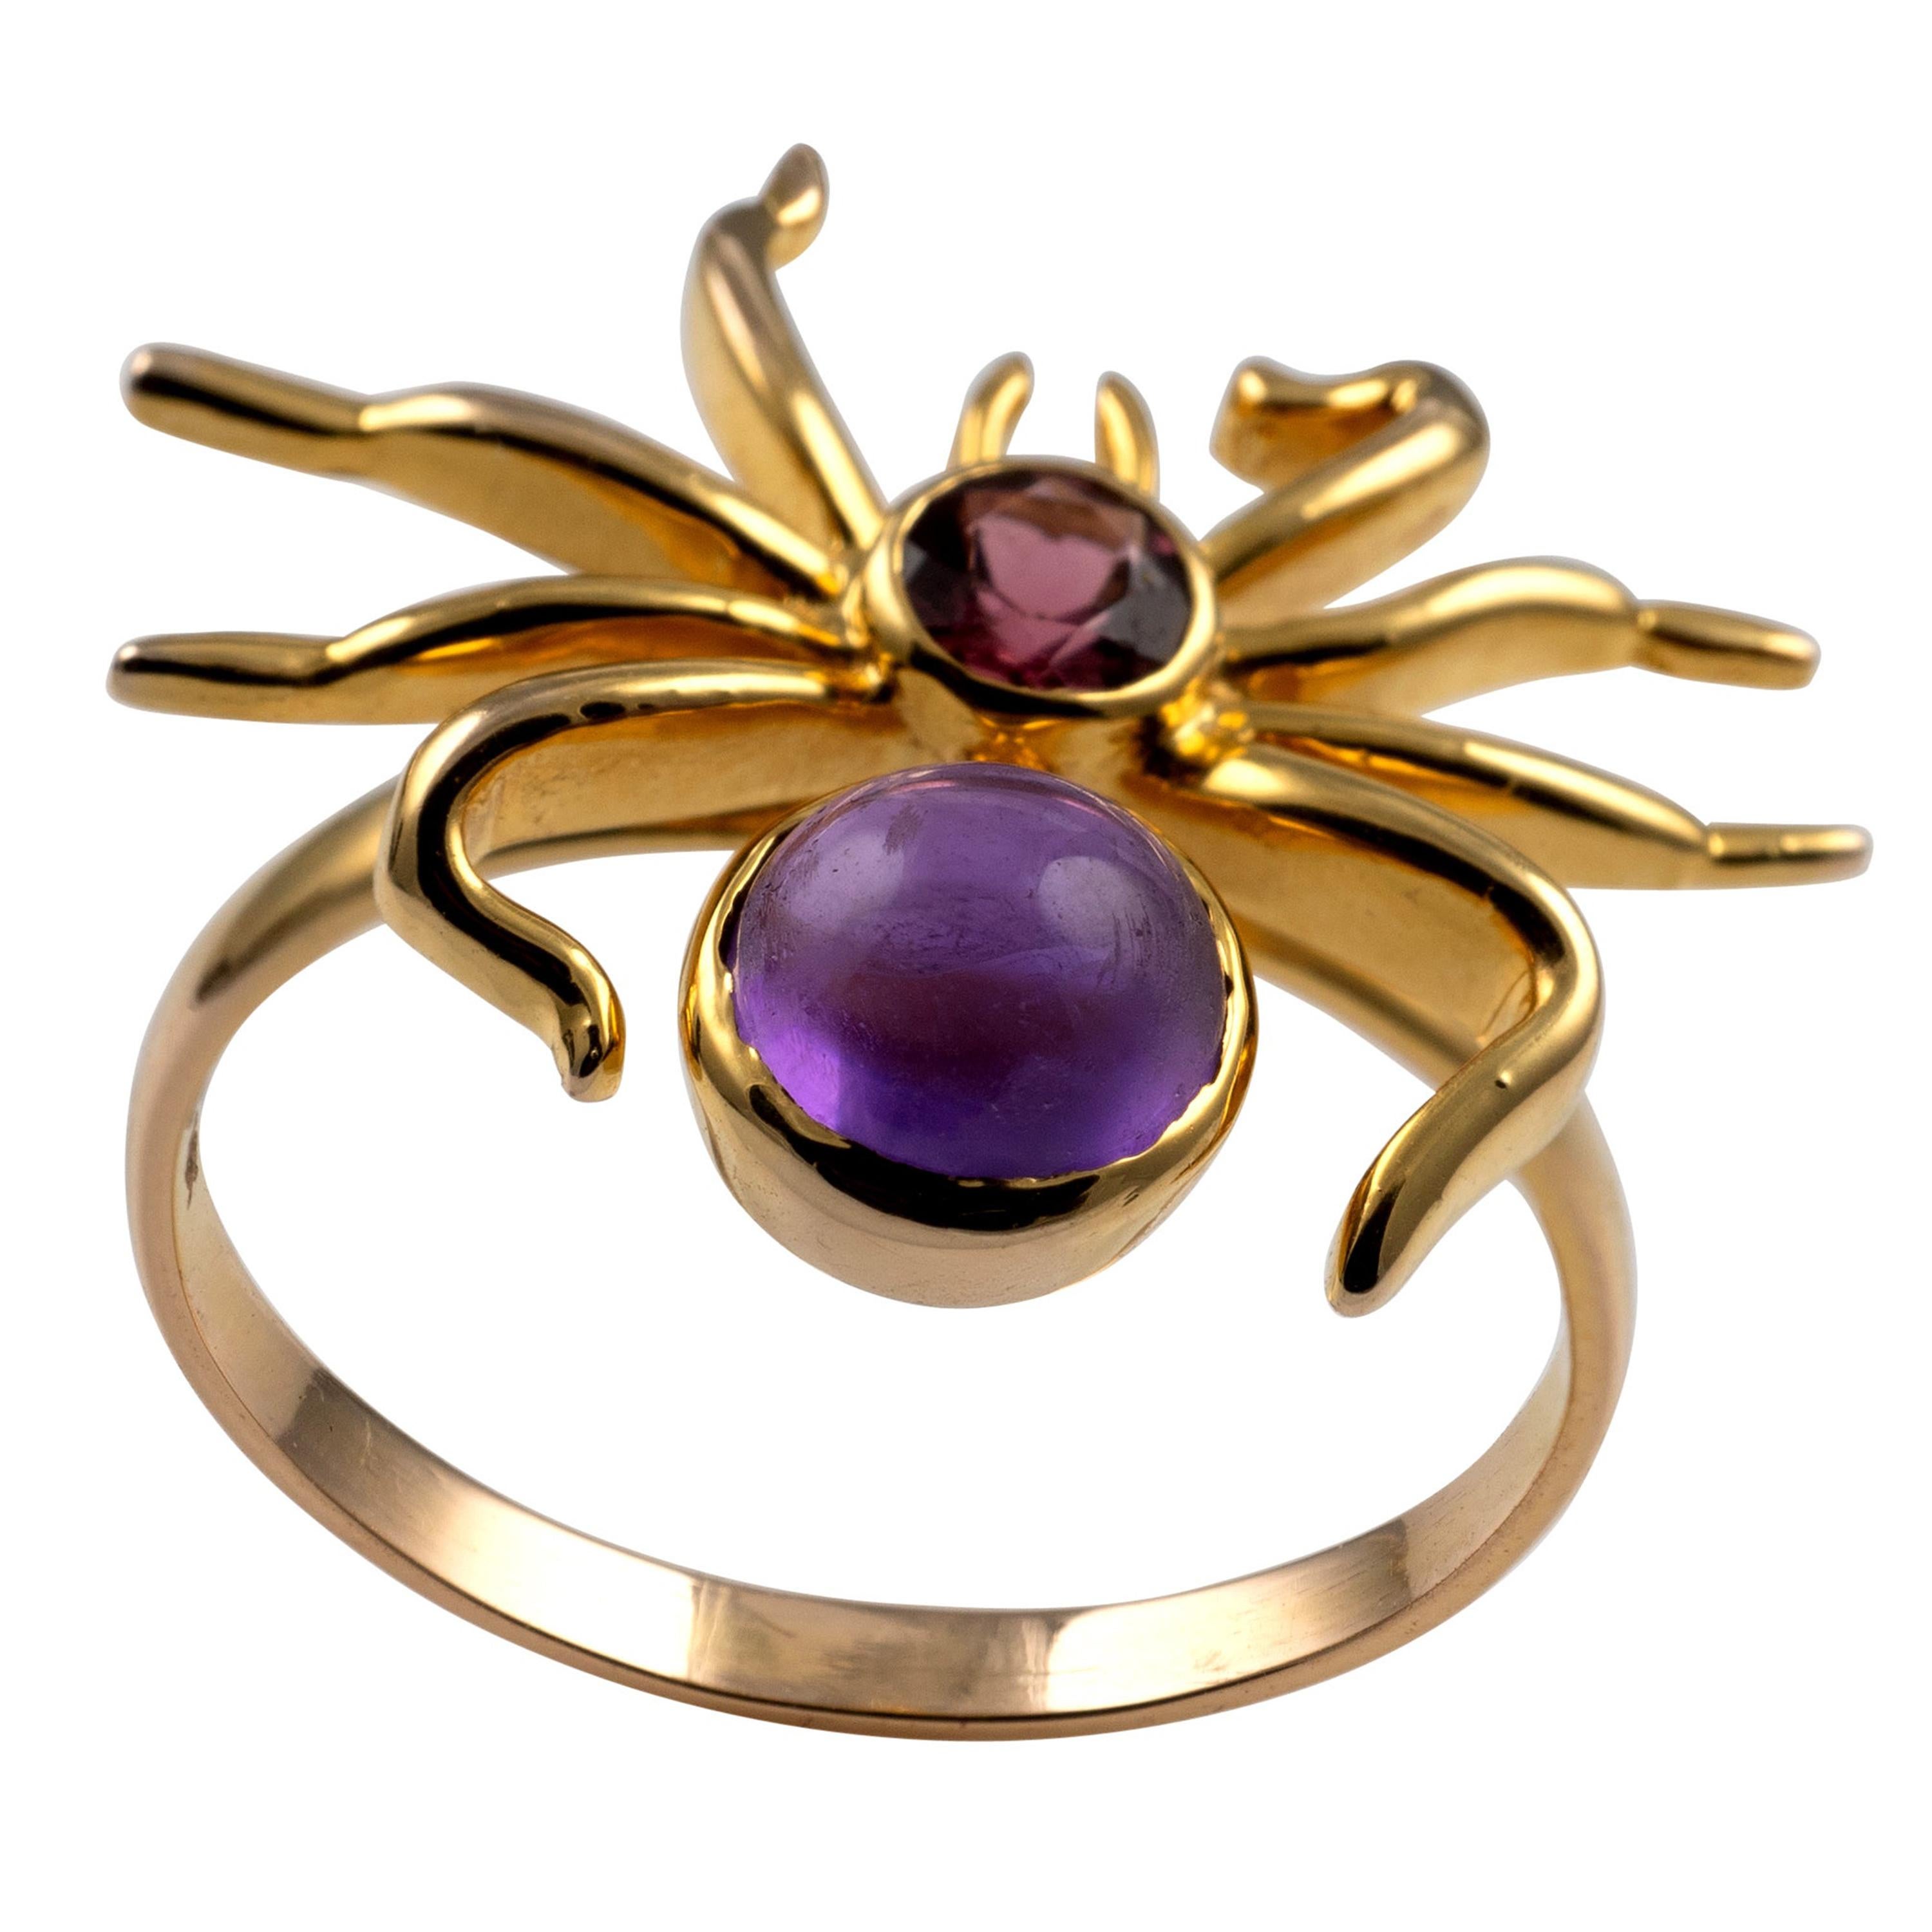 Spider Insect Ring 18 Karat Yellow Gold Pink Tourmaline and Amethyst